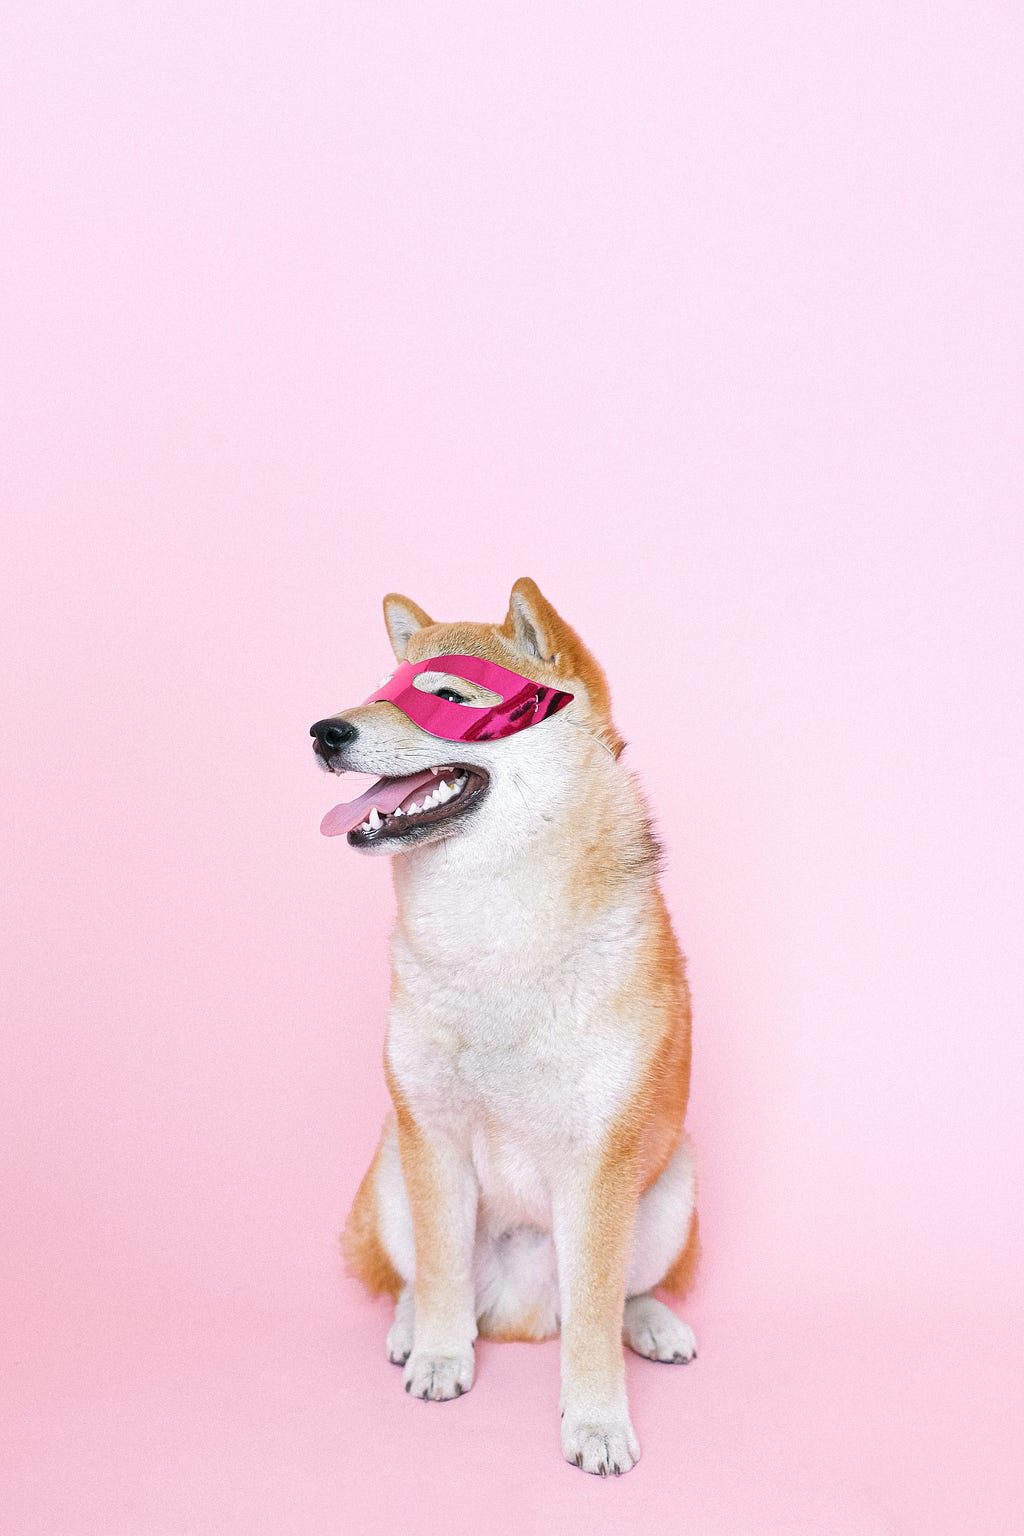 Dog with pink superhero mask, against pink background